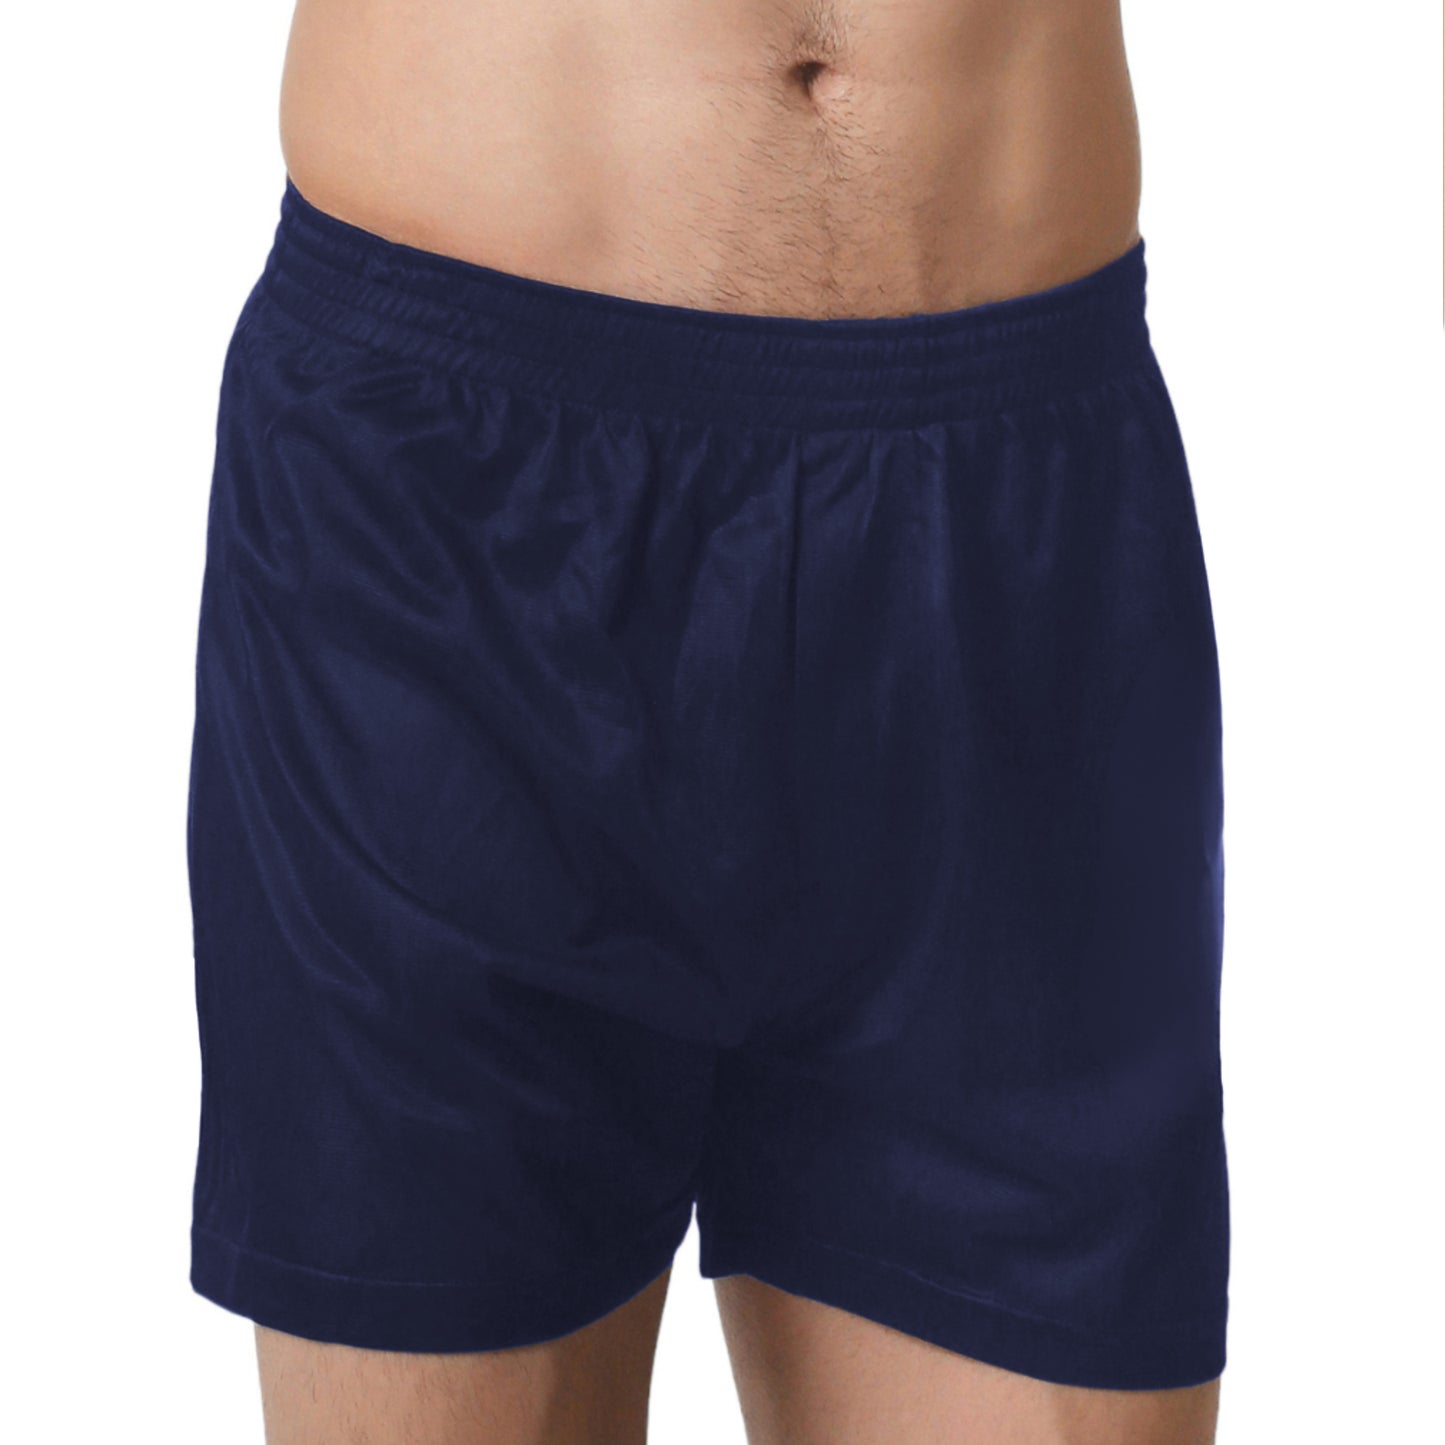 Players Nylon Tricot Boxer – Players Underwear - Free Shipping over $45